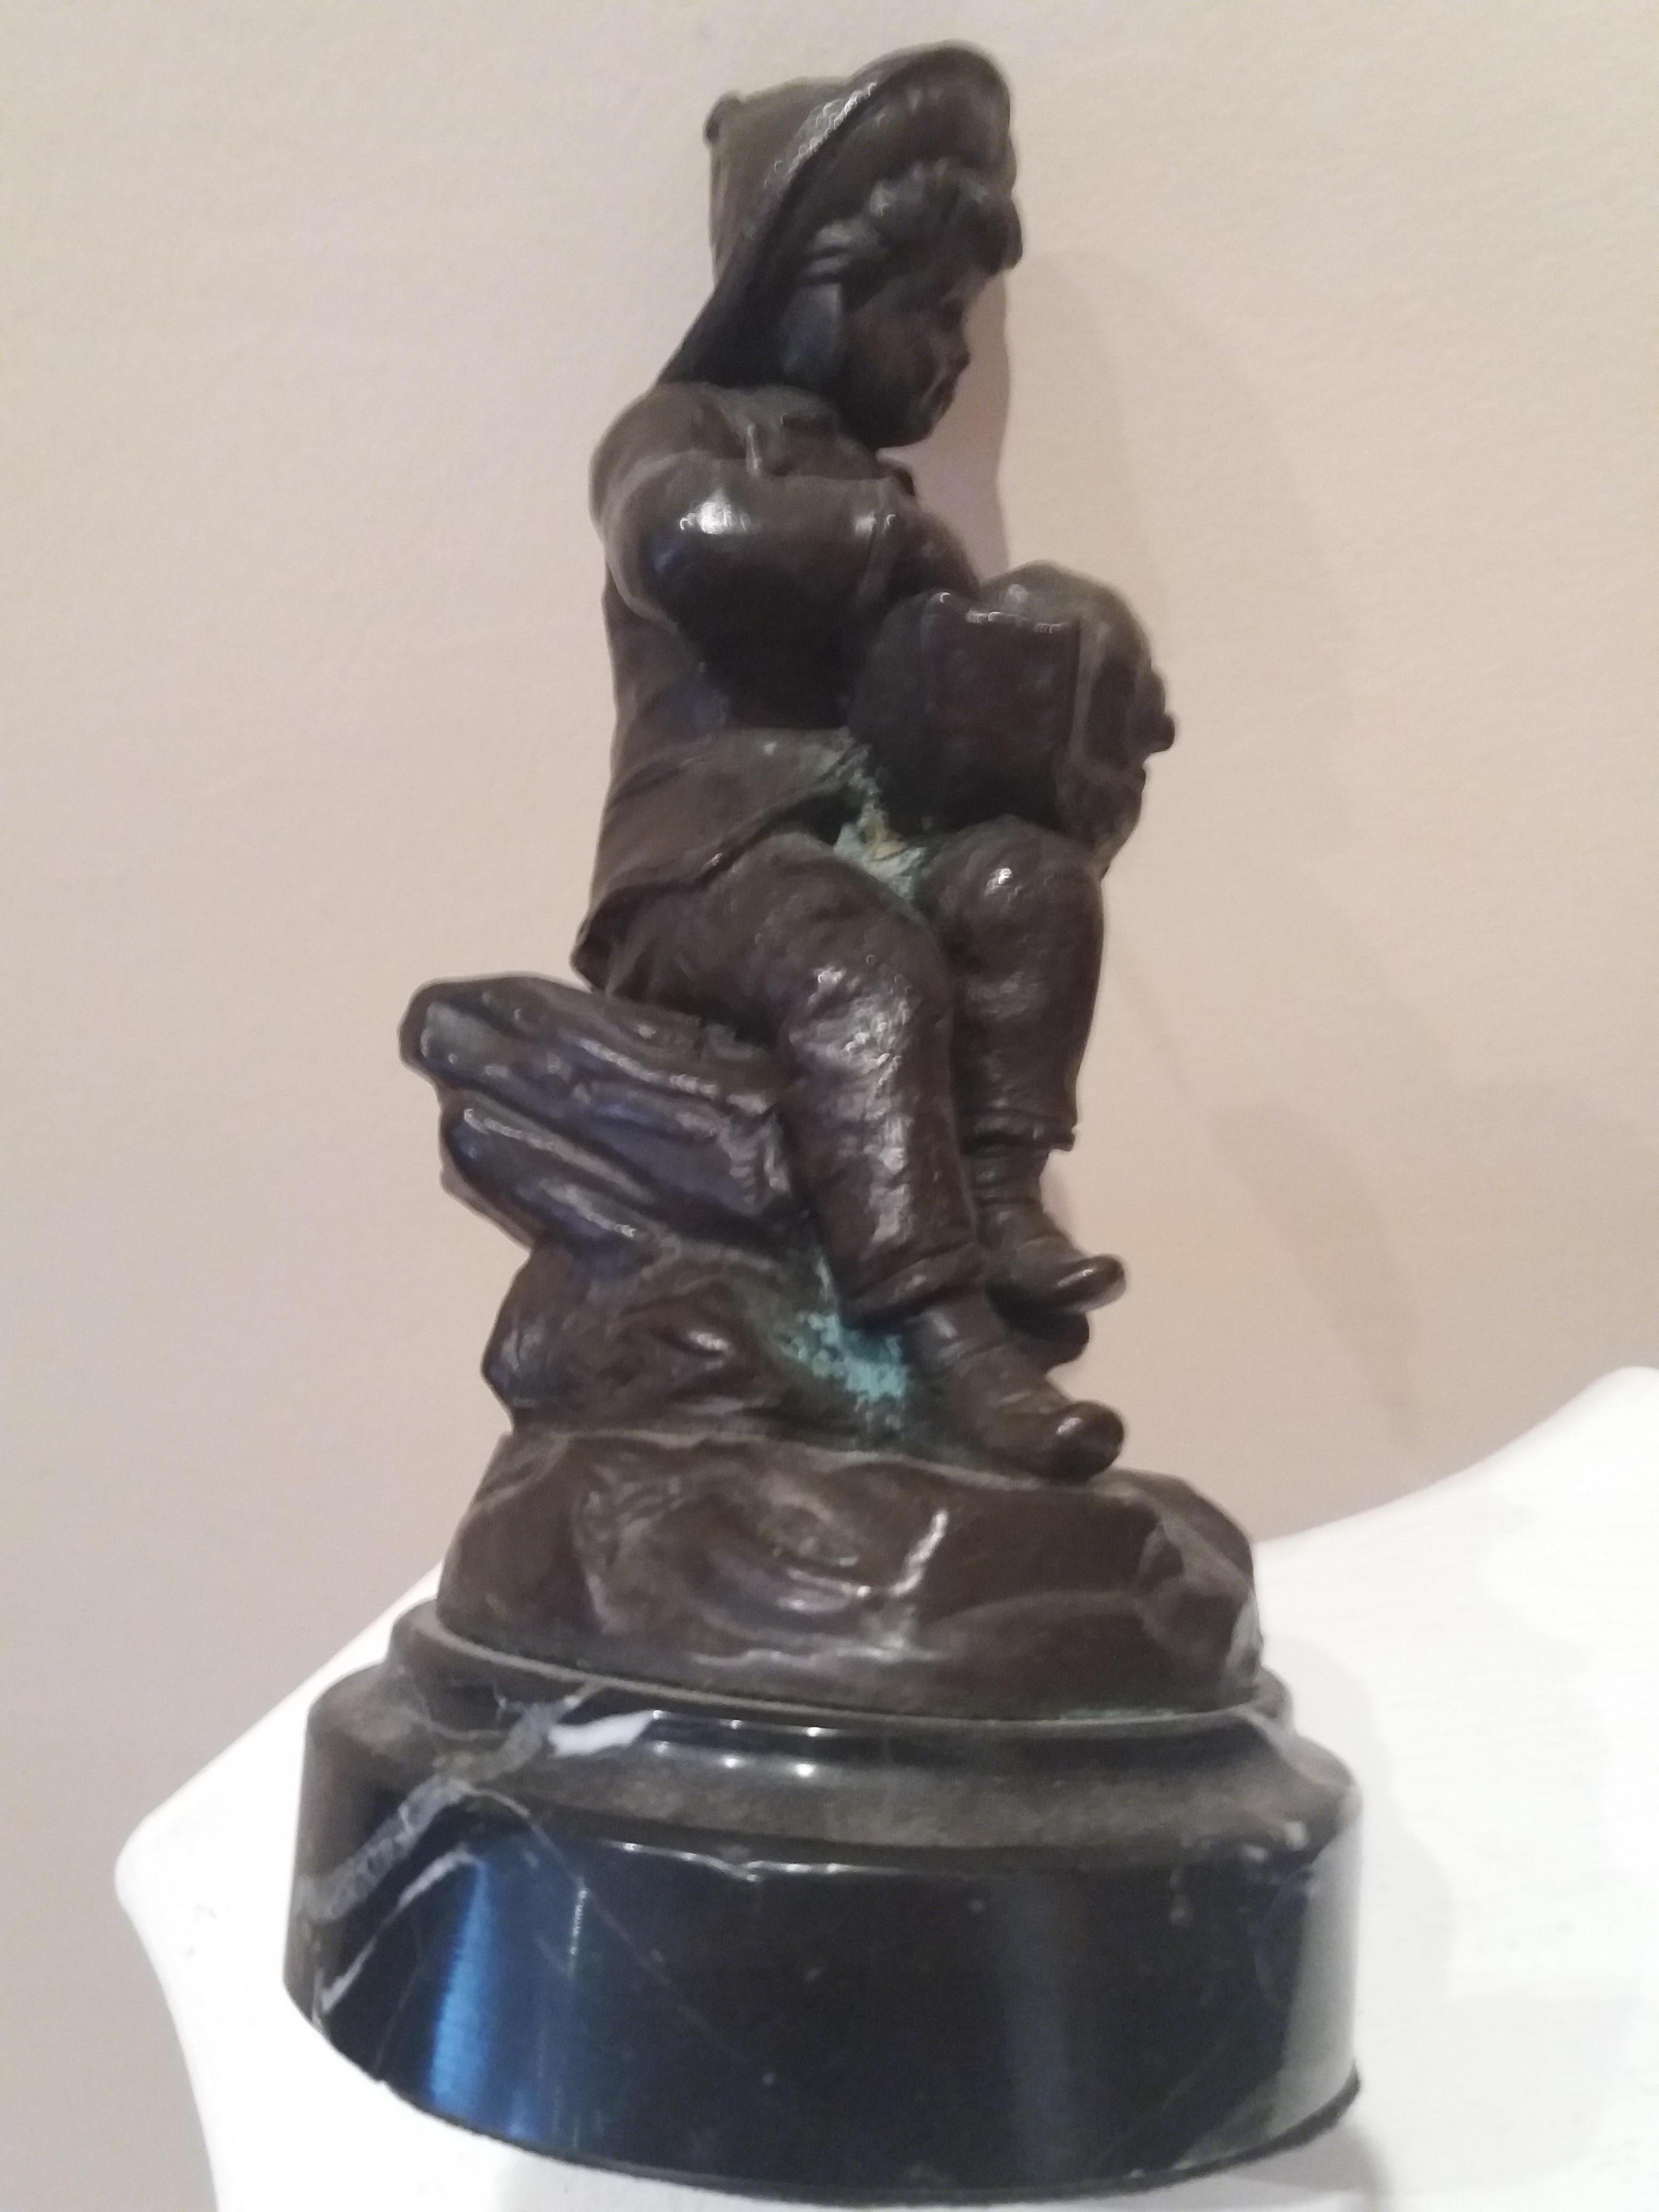  Bollel 23  Child and conch shell. Original multiple bronze sculpture 1